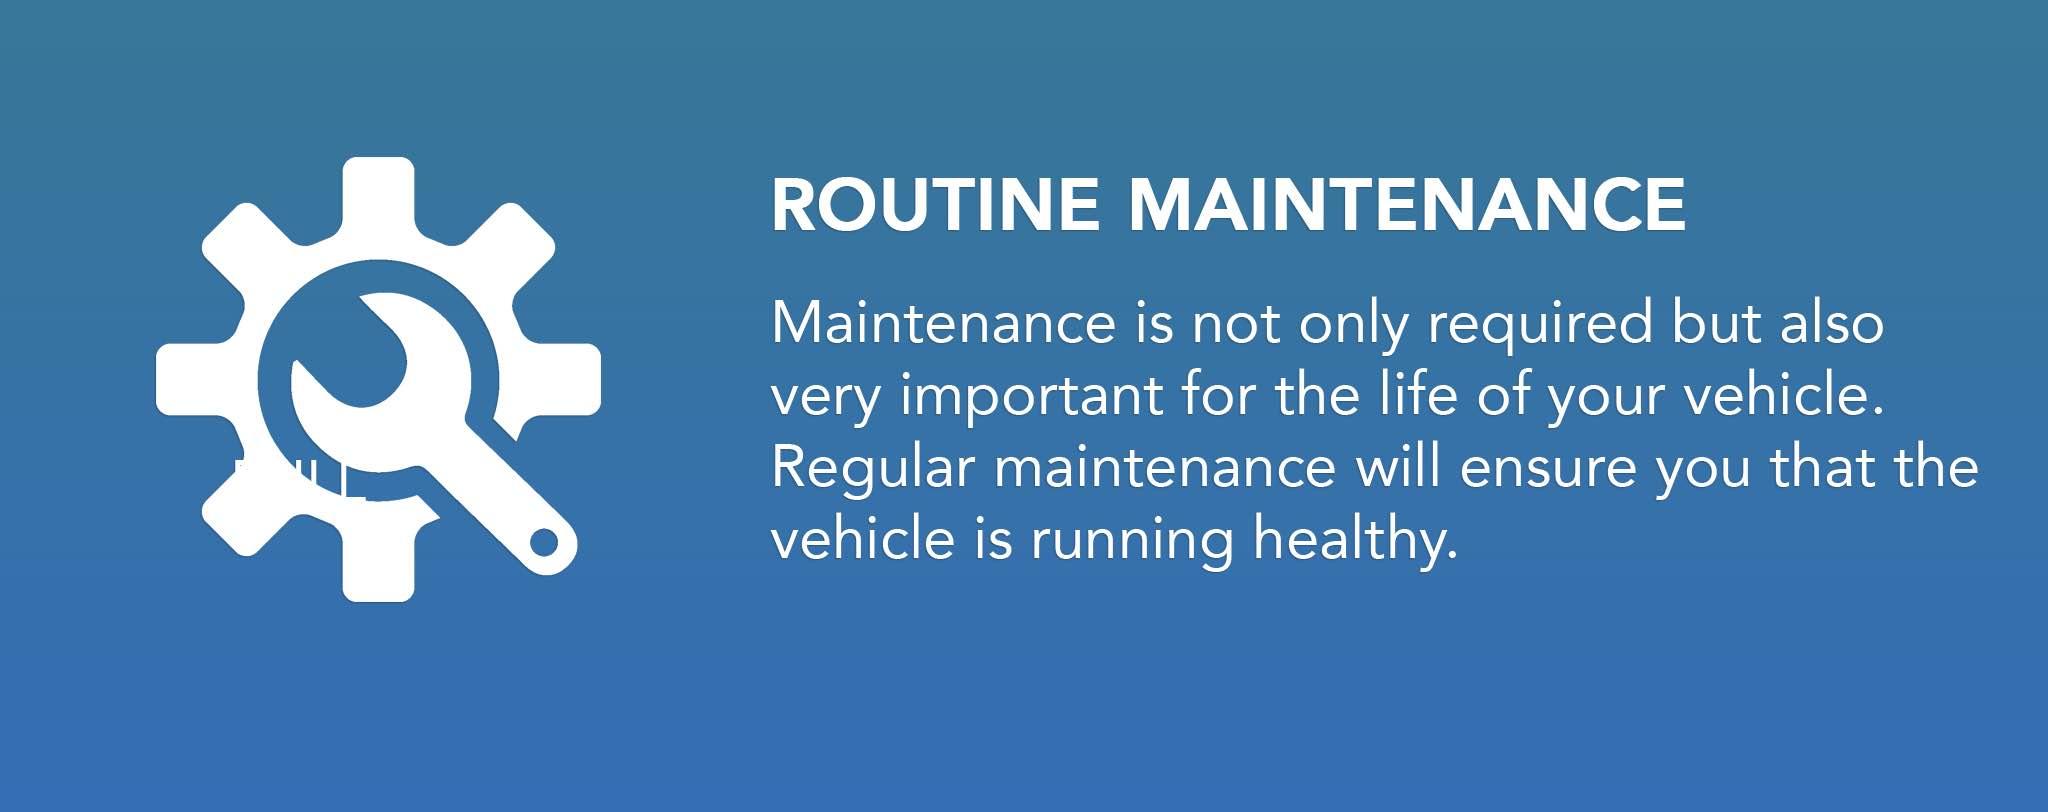 Maintenance is not only required but also very important for the life of your vehicle. Regular maintenance will ensure you that the vehicle is running healthy.